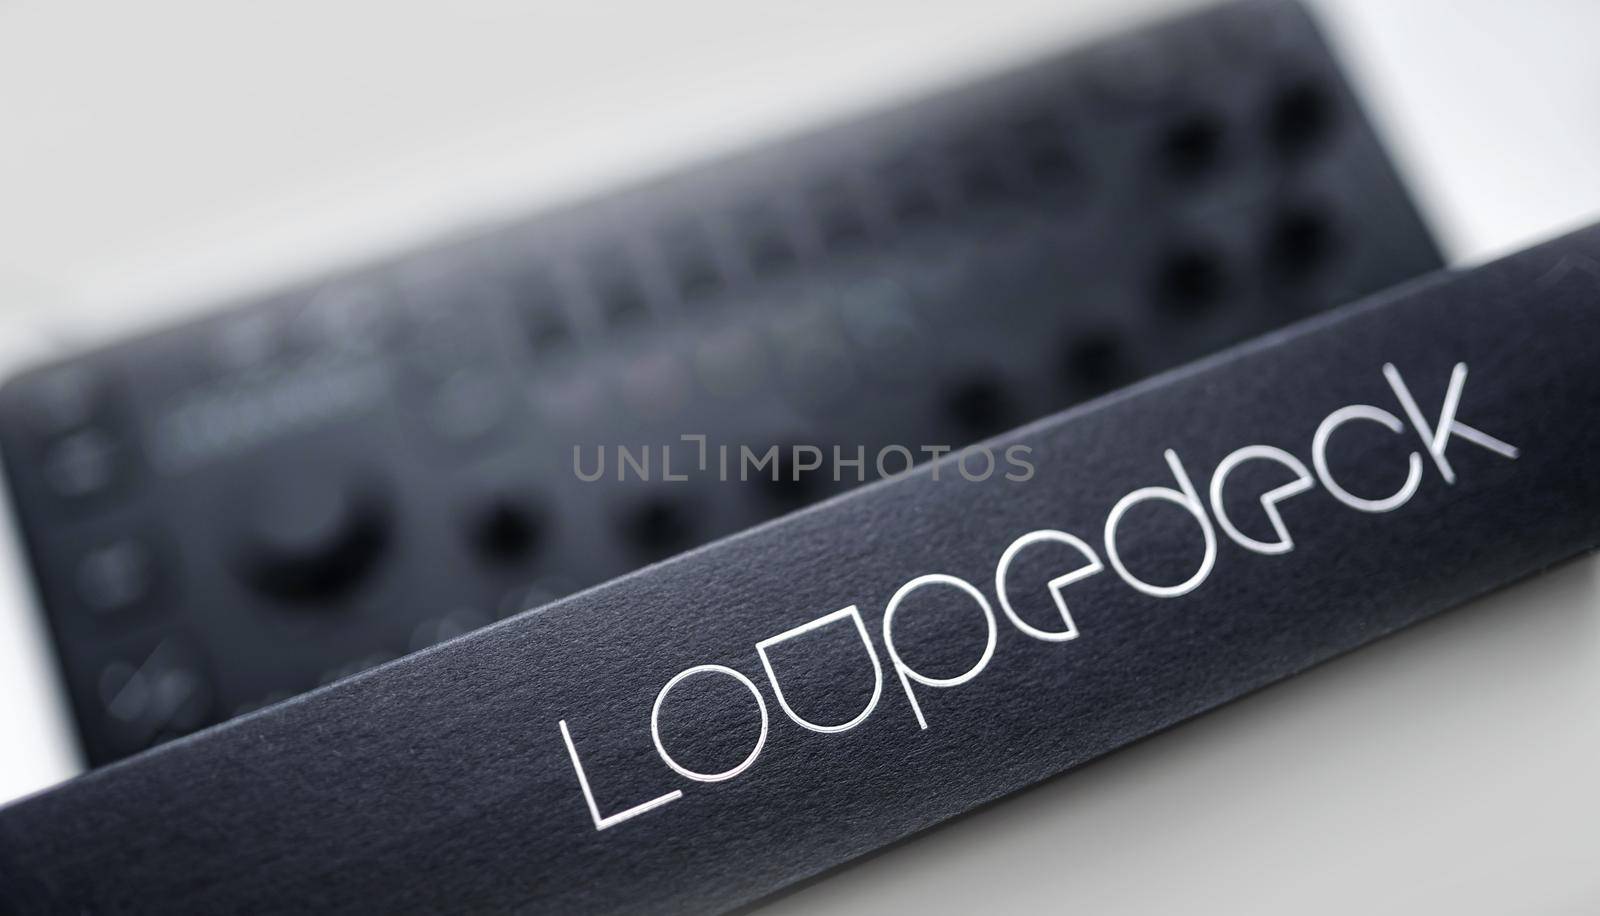 Loupedeck Photo Editing Console by GekaSkr